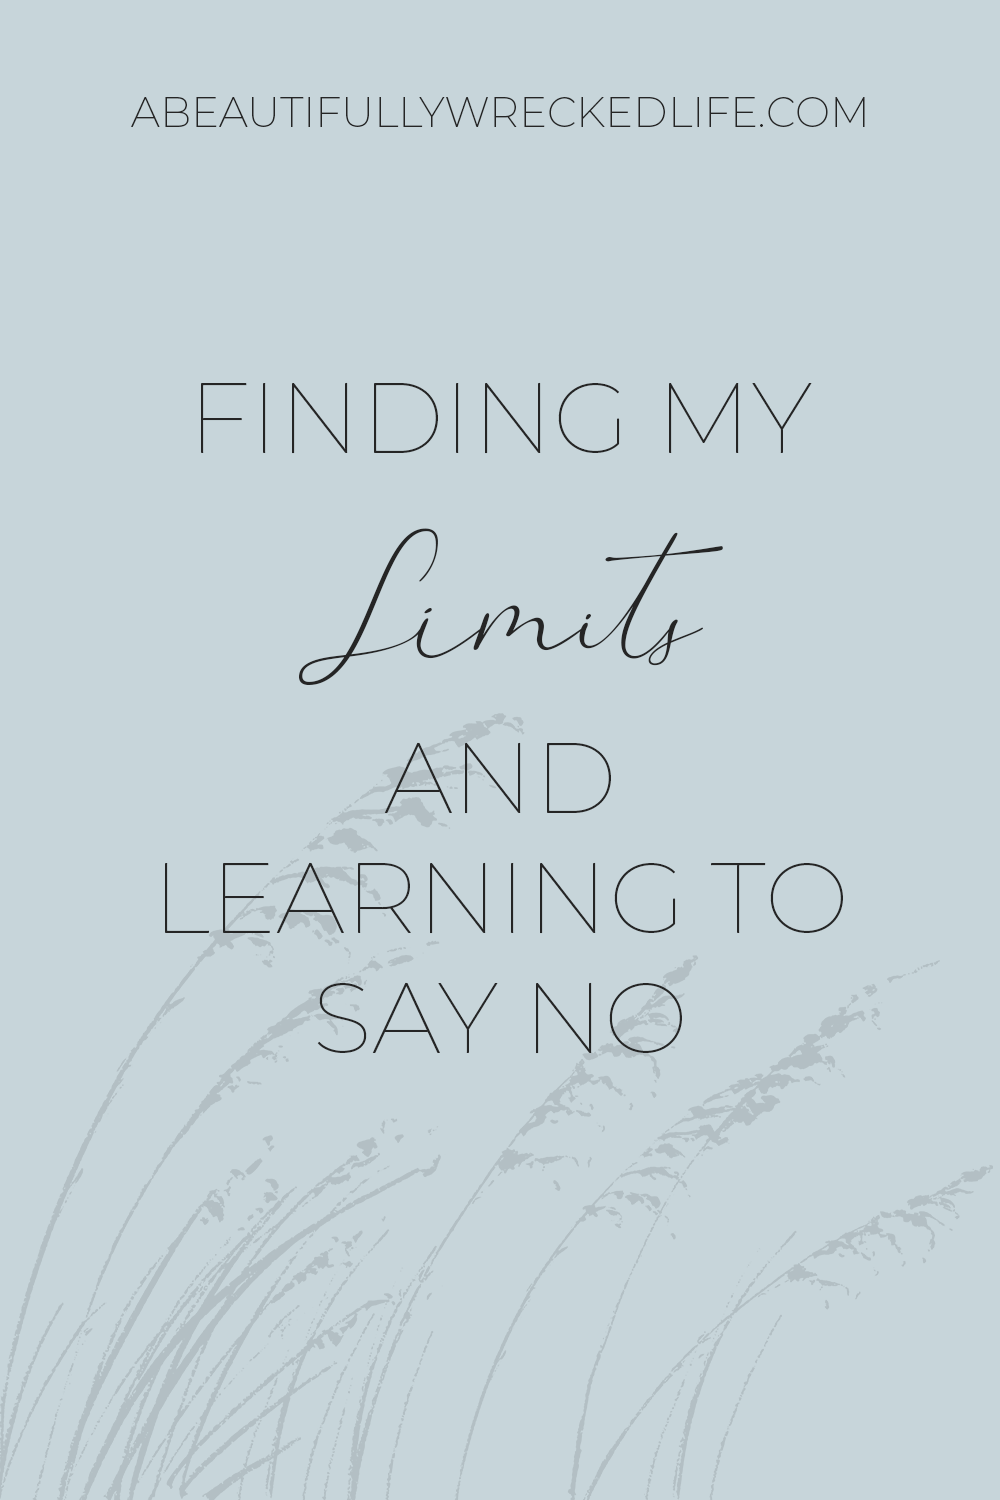 FINDING MY LIMITS AND LEARNING TO SAY NO